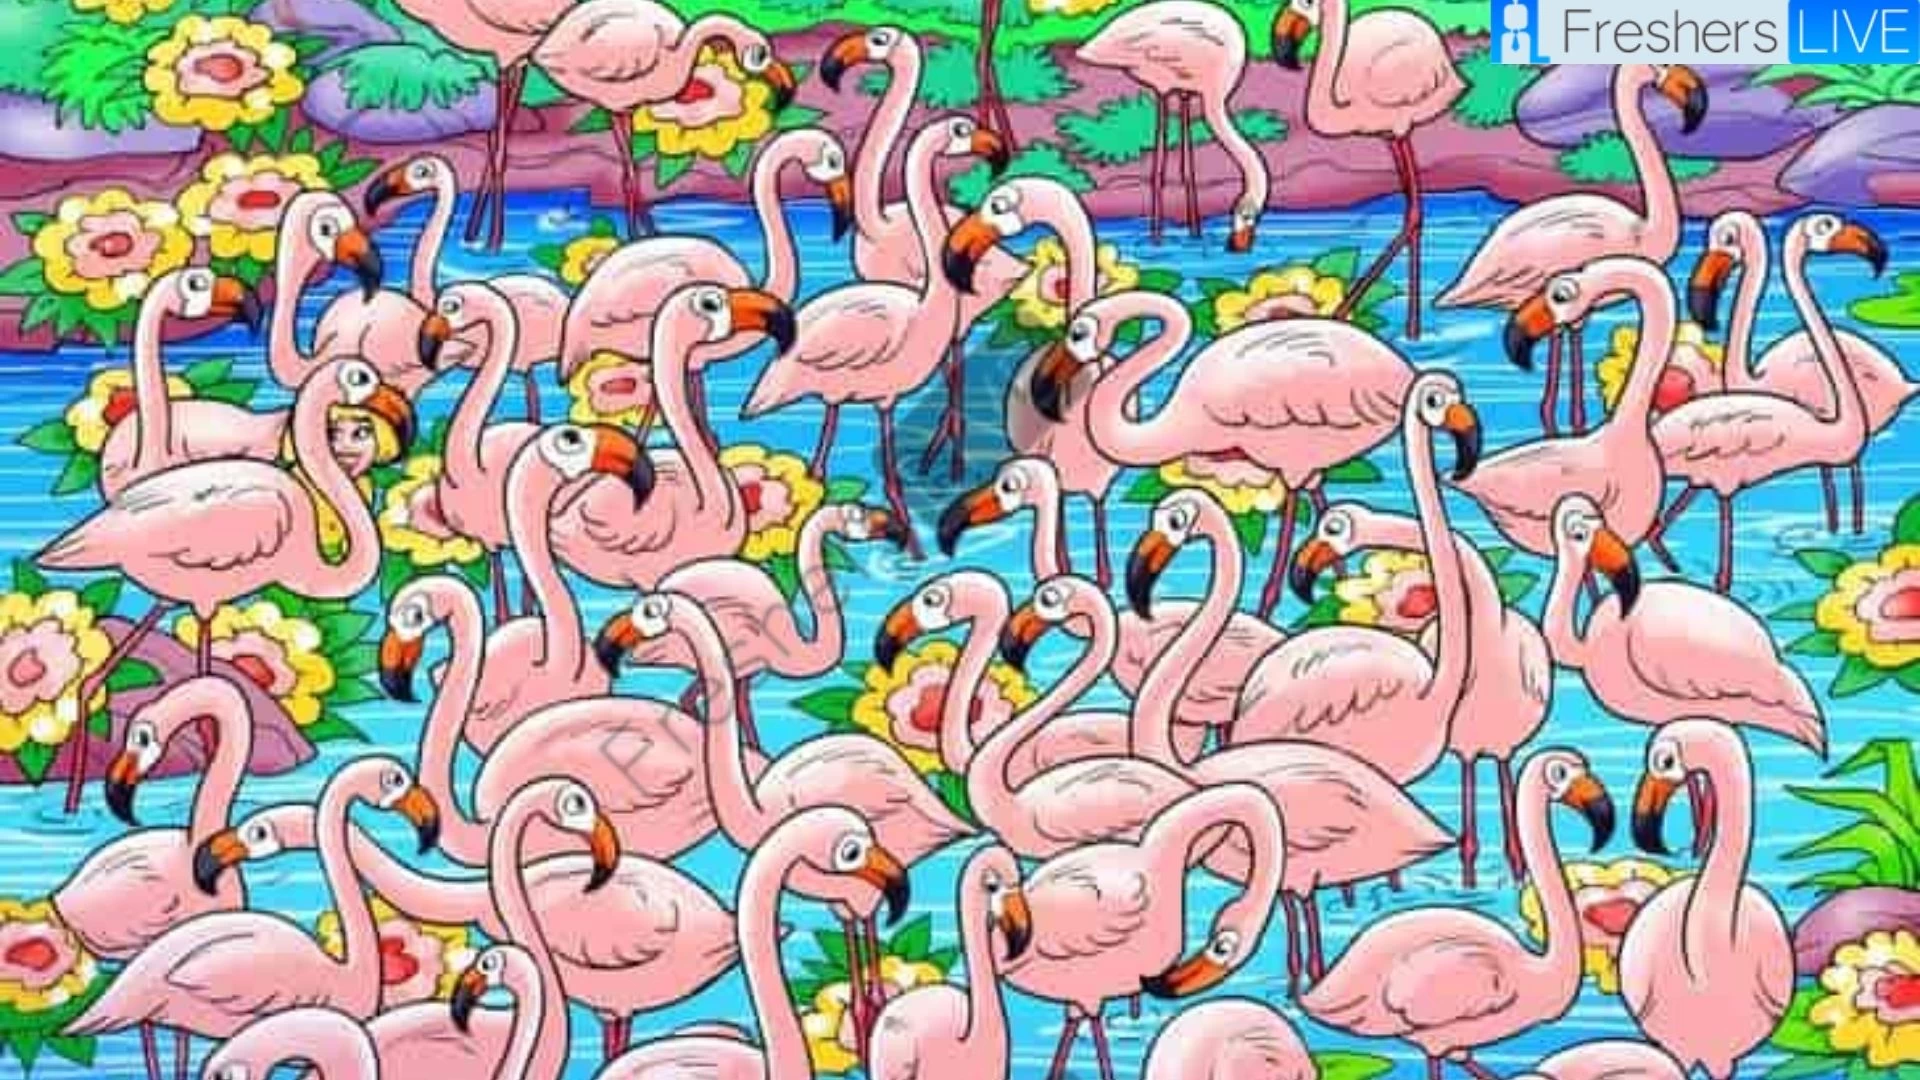 You have 50/50 Vision if you can find the hidden girl among flamingos in 8 seconds!